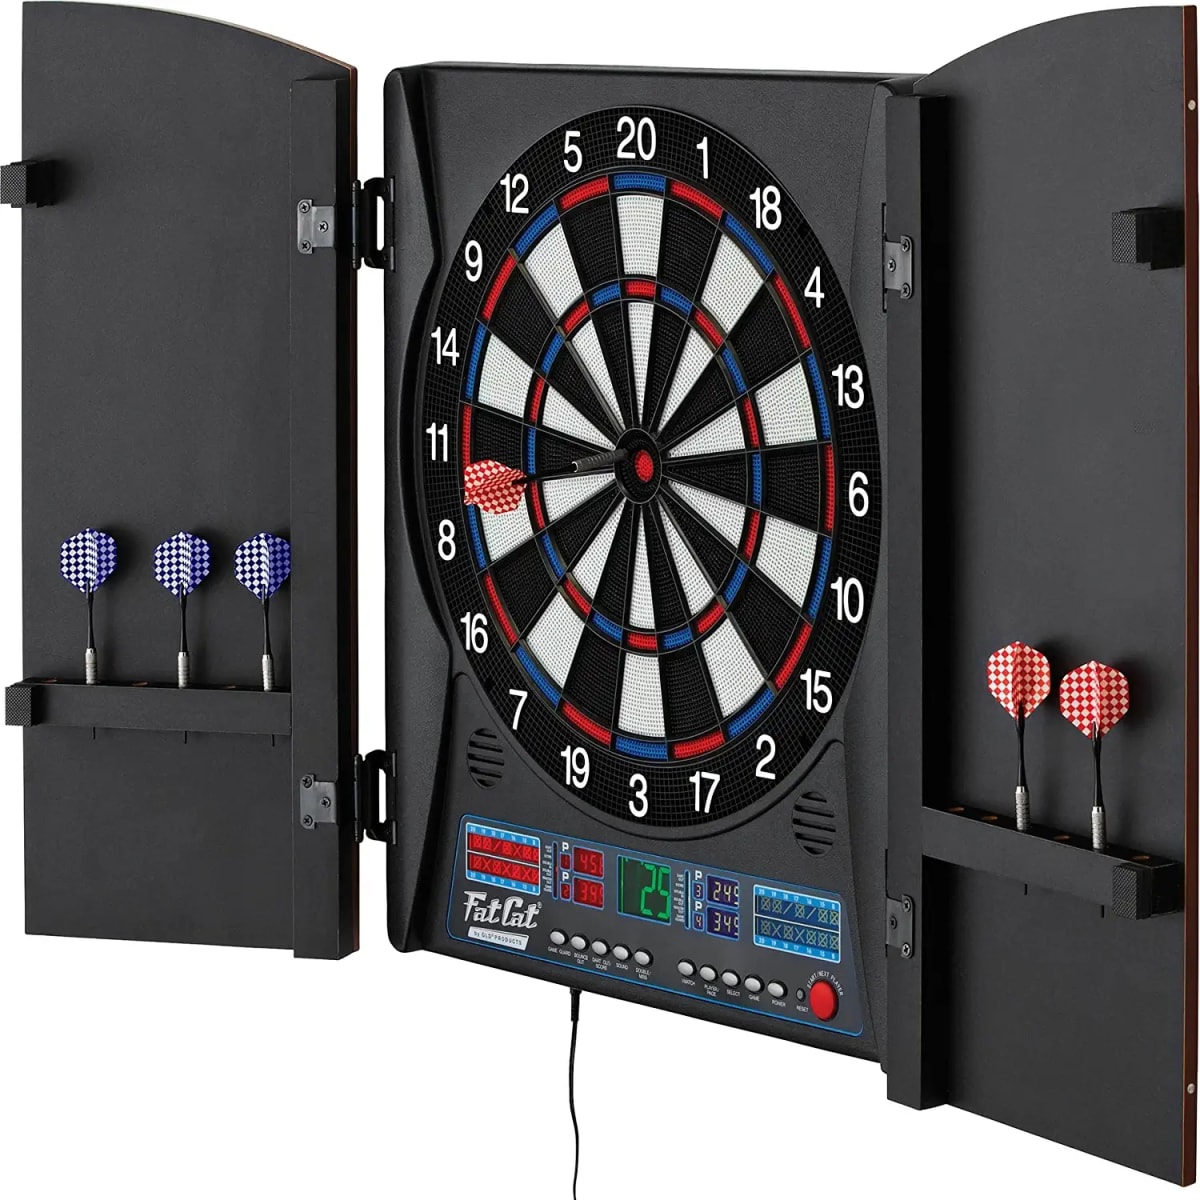 Fat Cat Electronx Electronic Dartboard Compact Size Over 35 Games with 167 Options Built-In Cabinet and Dart Storage for up to 12 Darts Auto Scoring LCD Display 8-Player Multiplayer and Soft Tip Darts